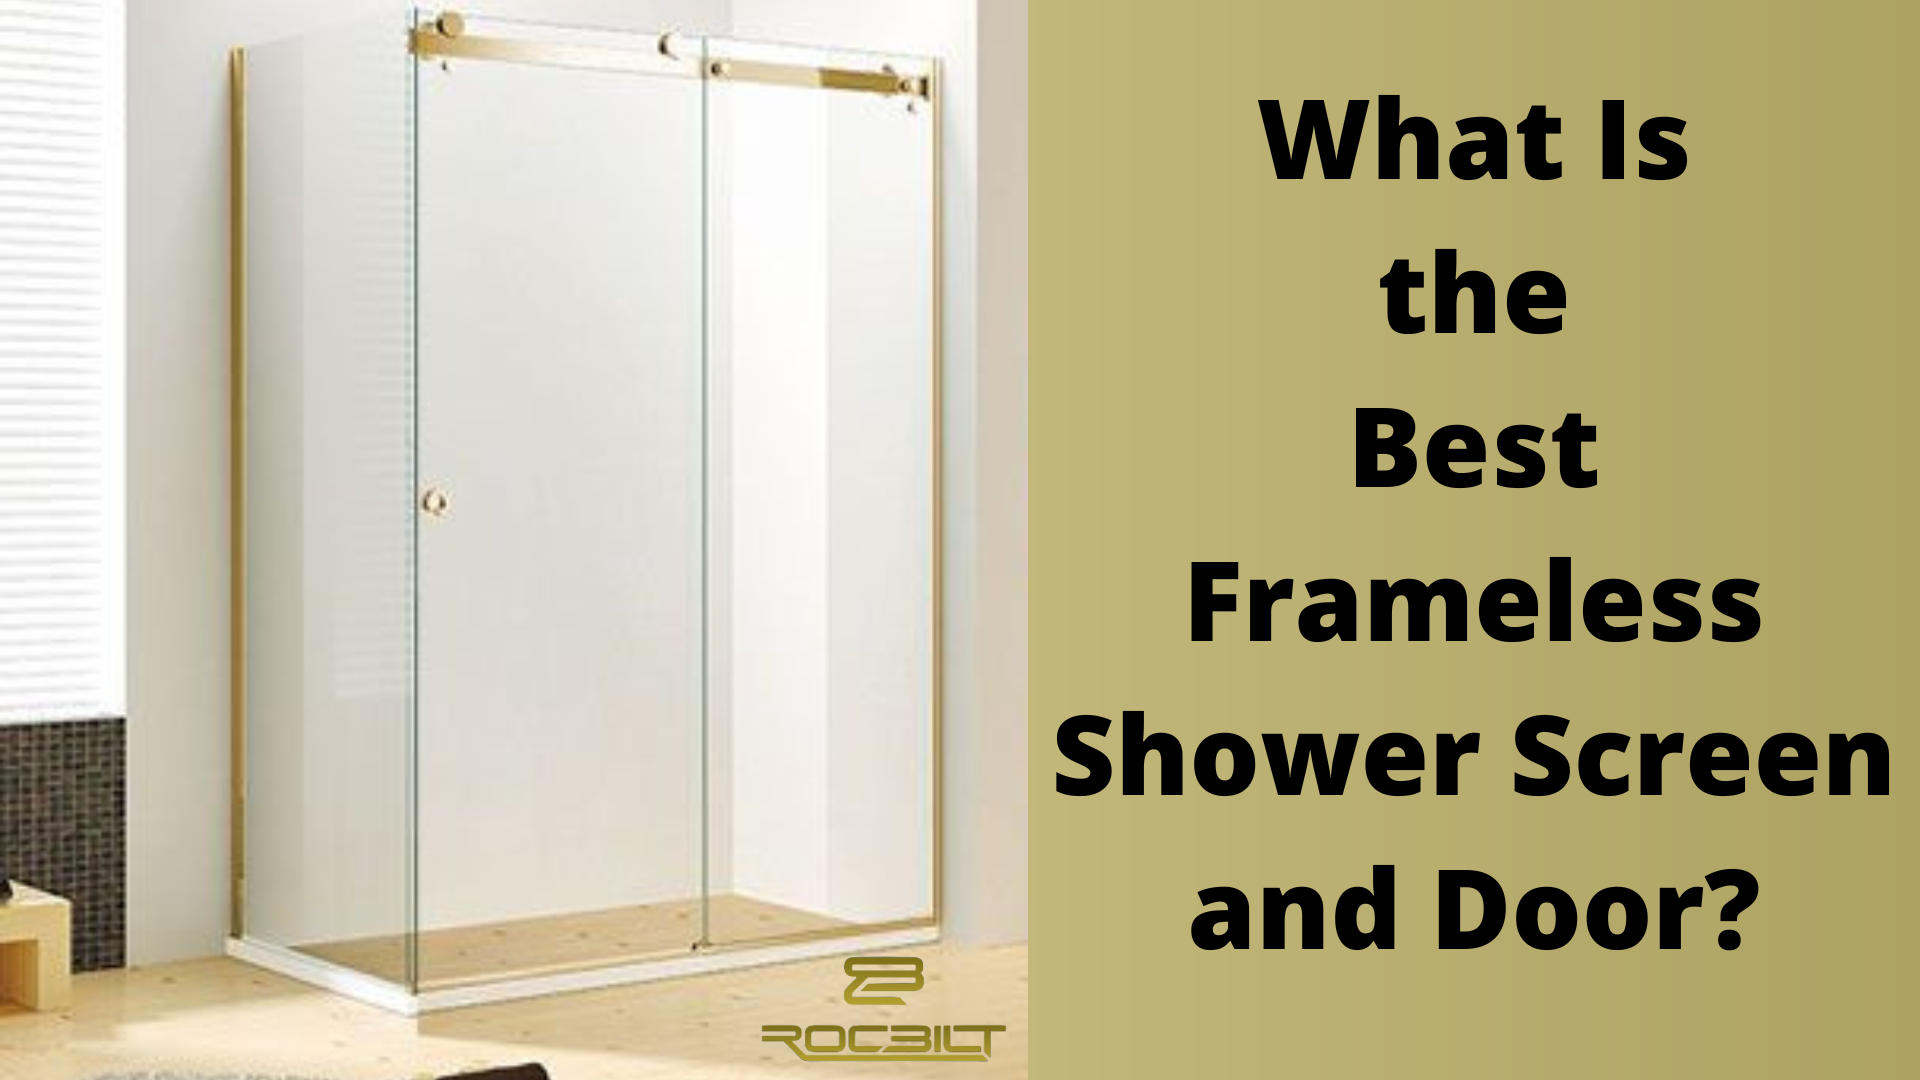 What Is the Best Frameless Shower Screen and Door?